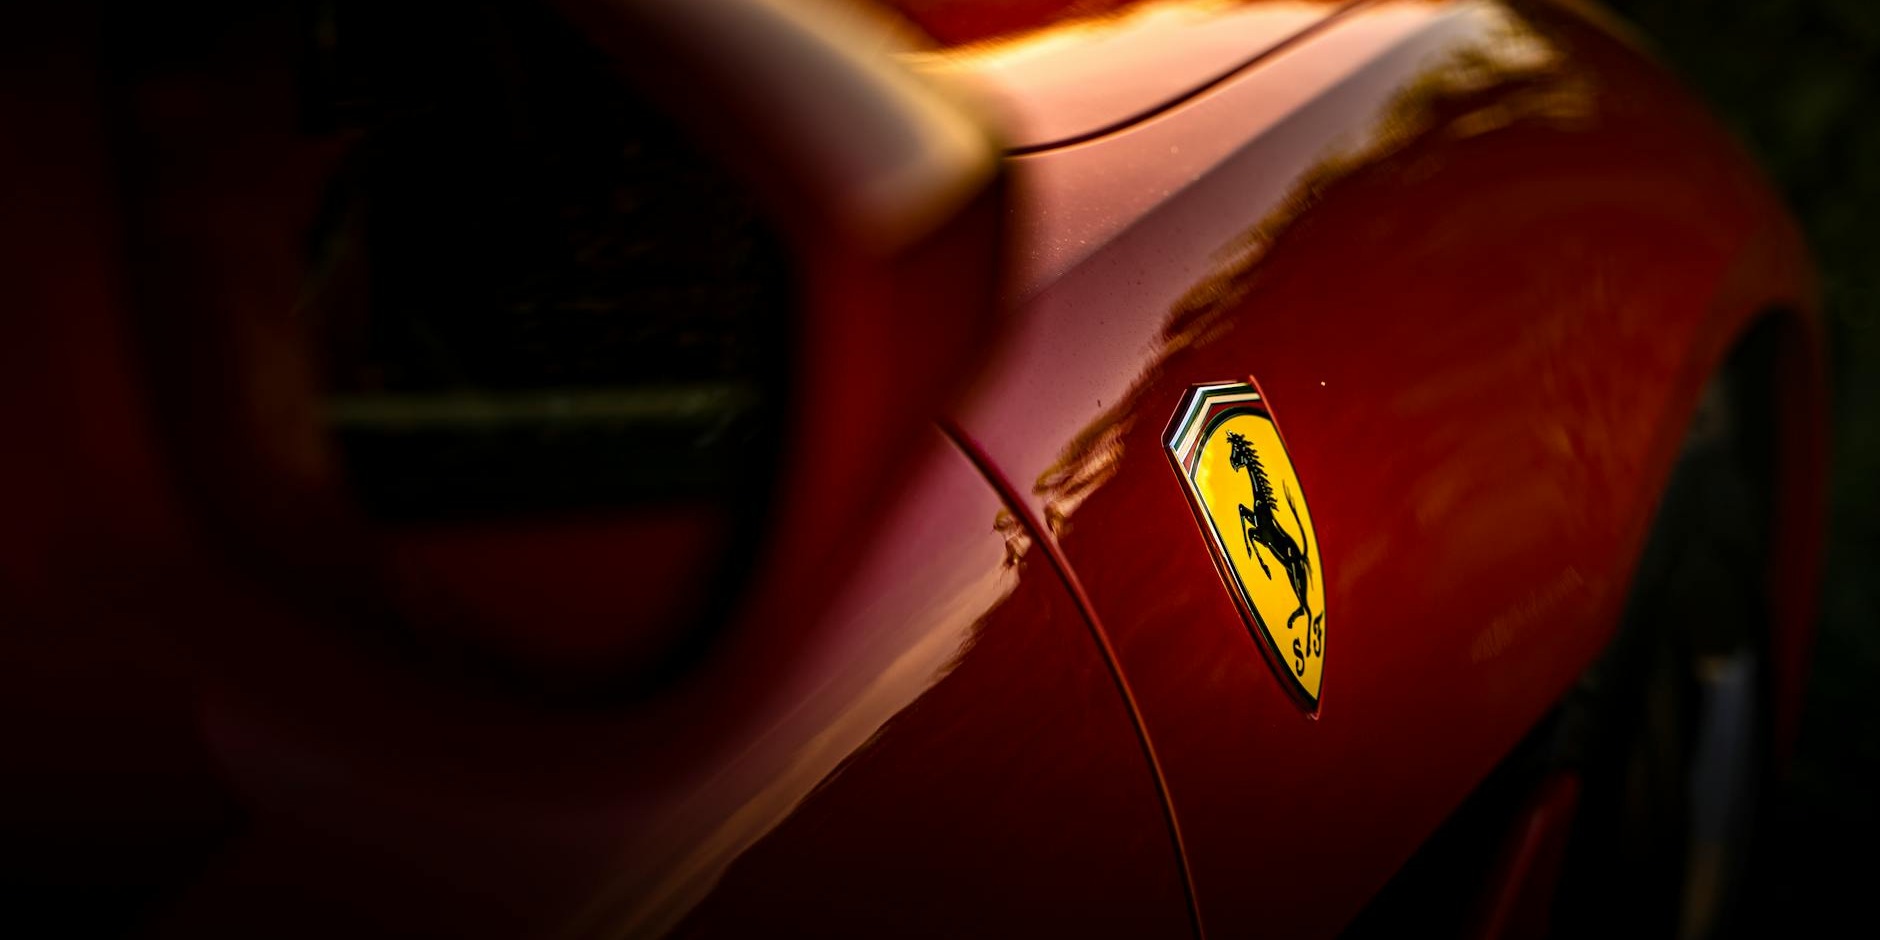 What to Look for When Hiring a Ferrari in the UK